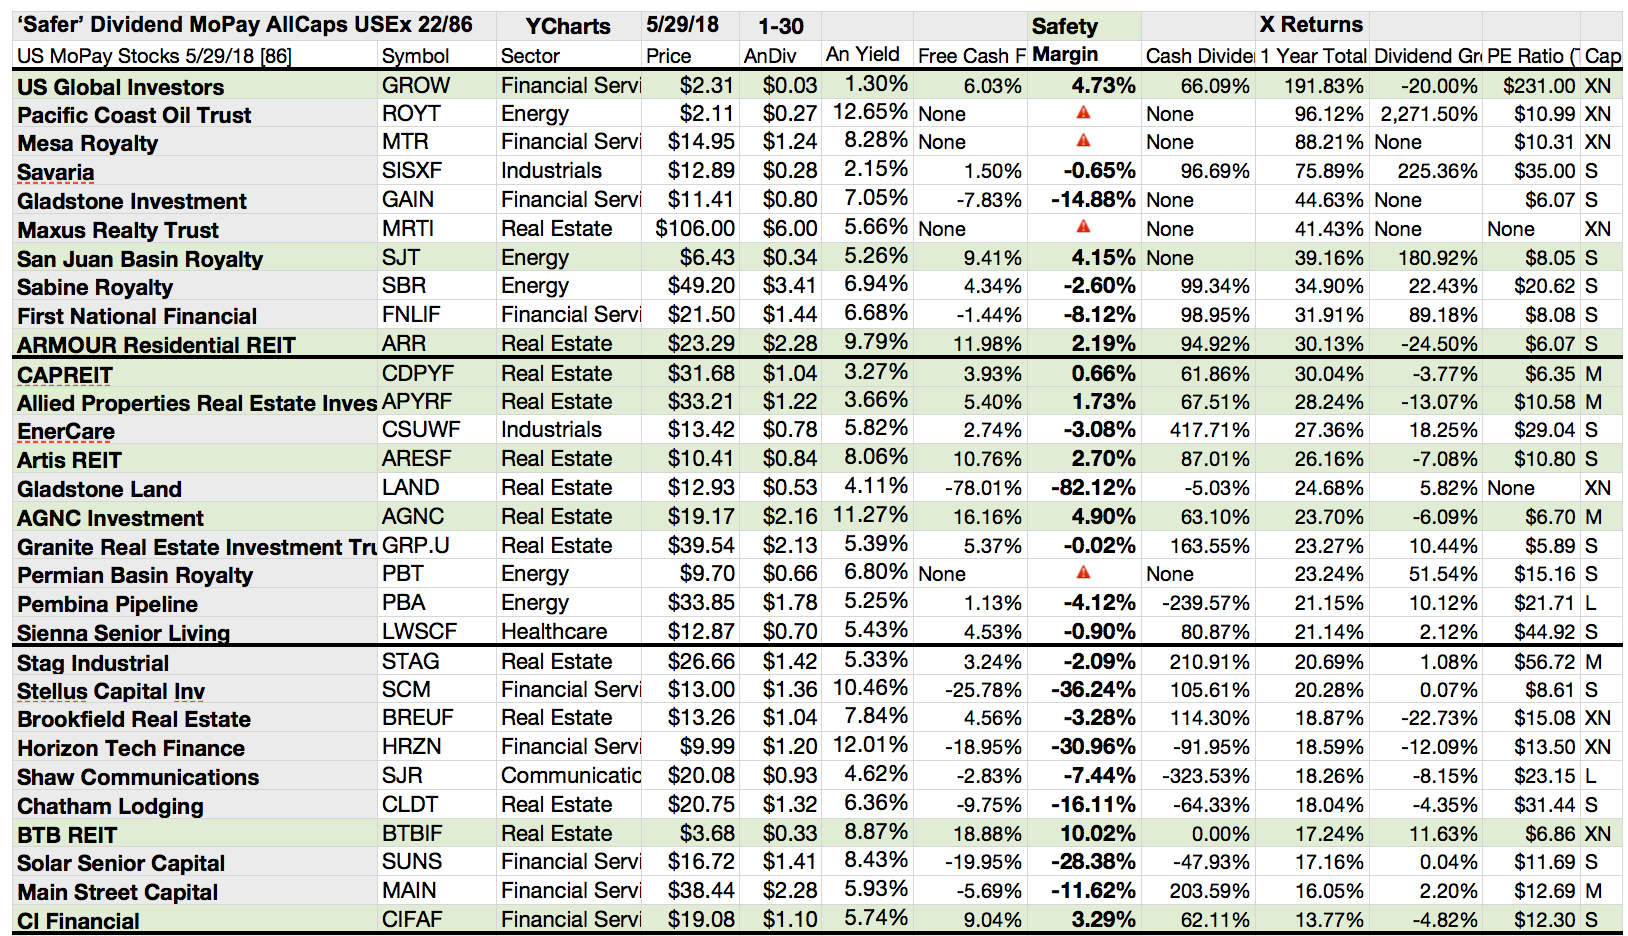 Here Are 22 'Safer' U.S. Monthly Paid Dividend Stocks For June